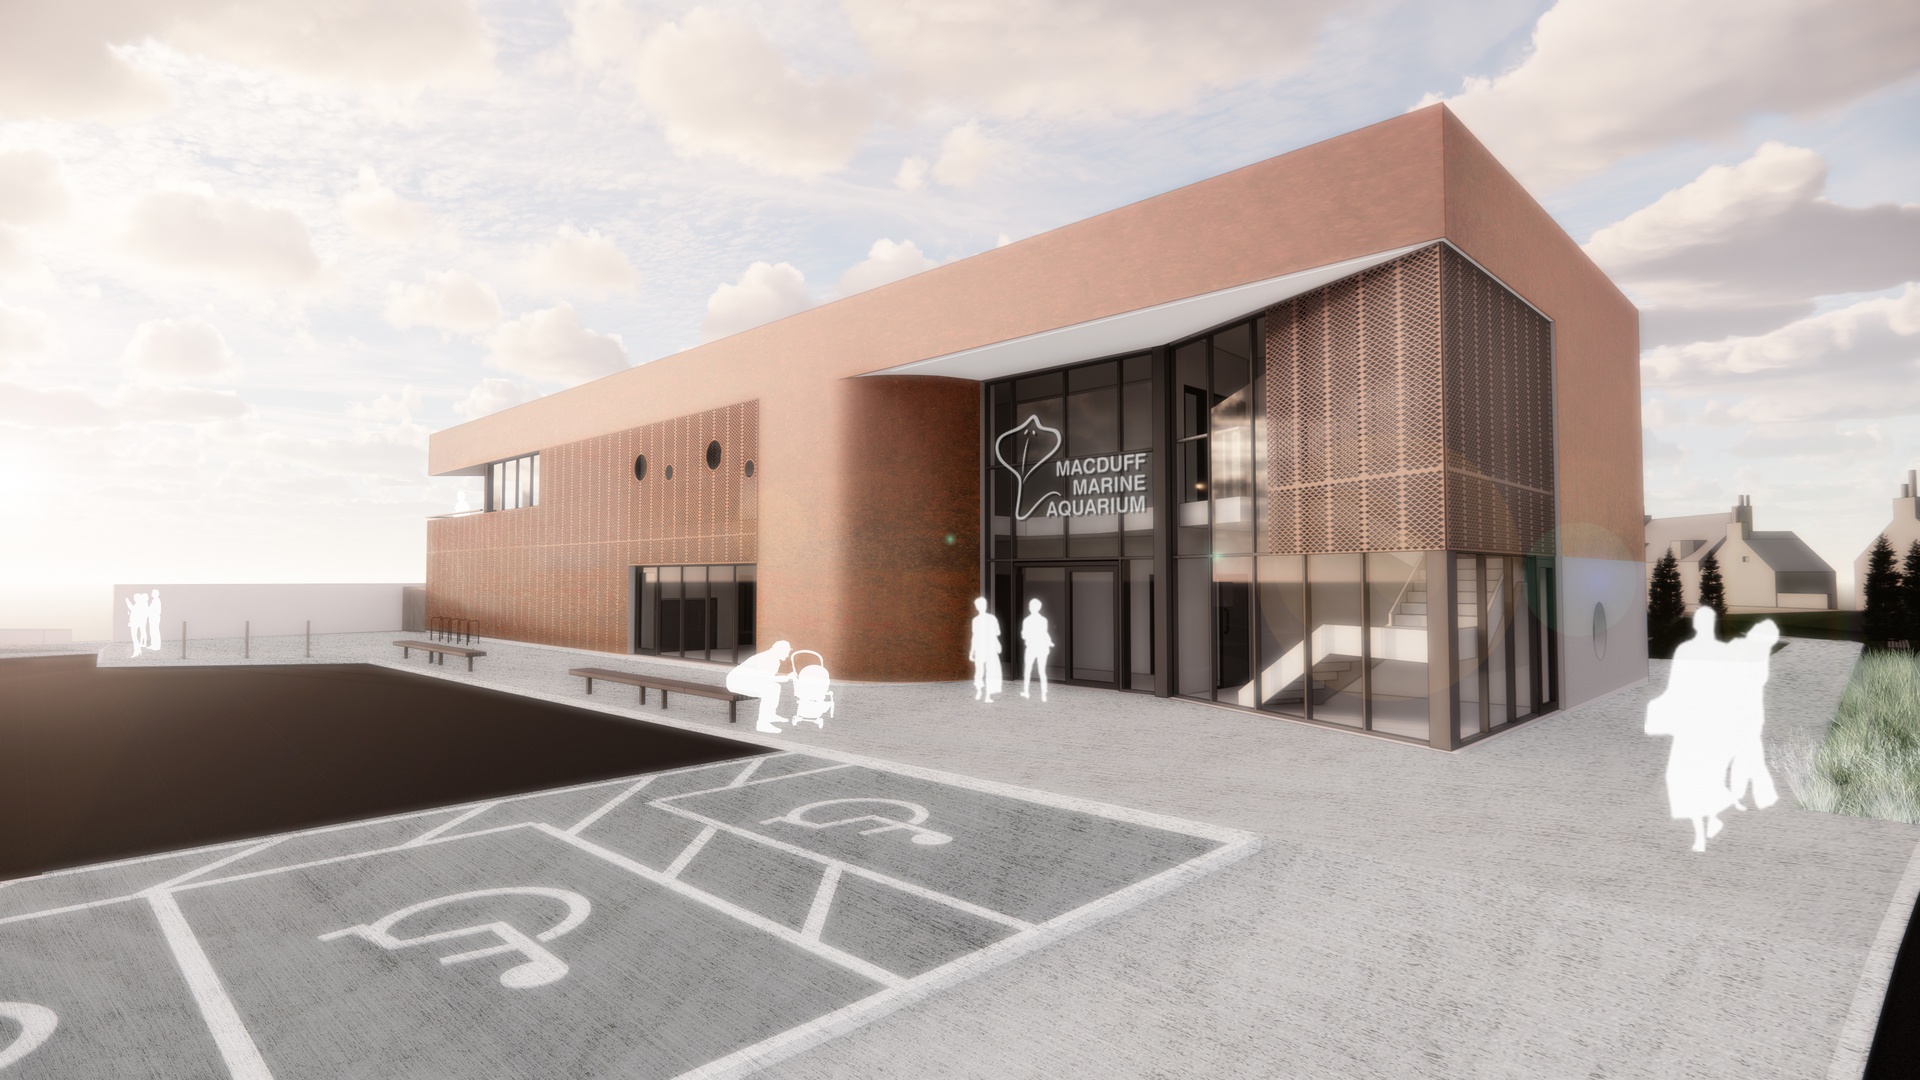 Plans for the upgrade on the main entrance at Macduff Marine Aquarium.